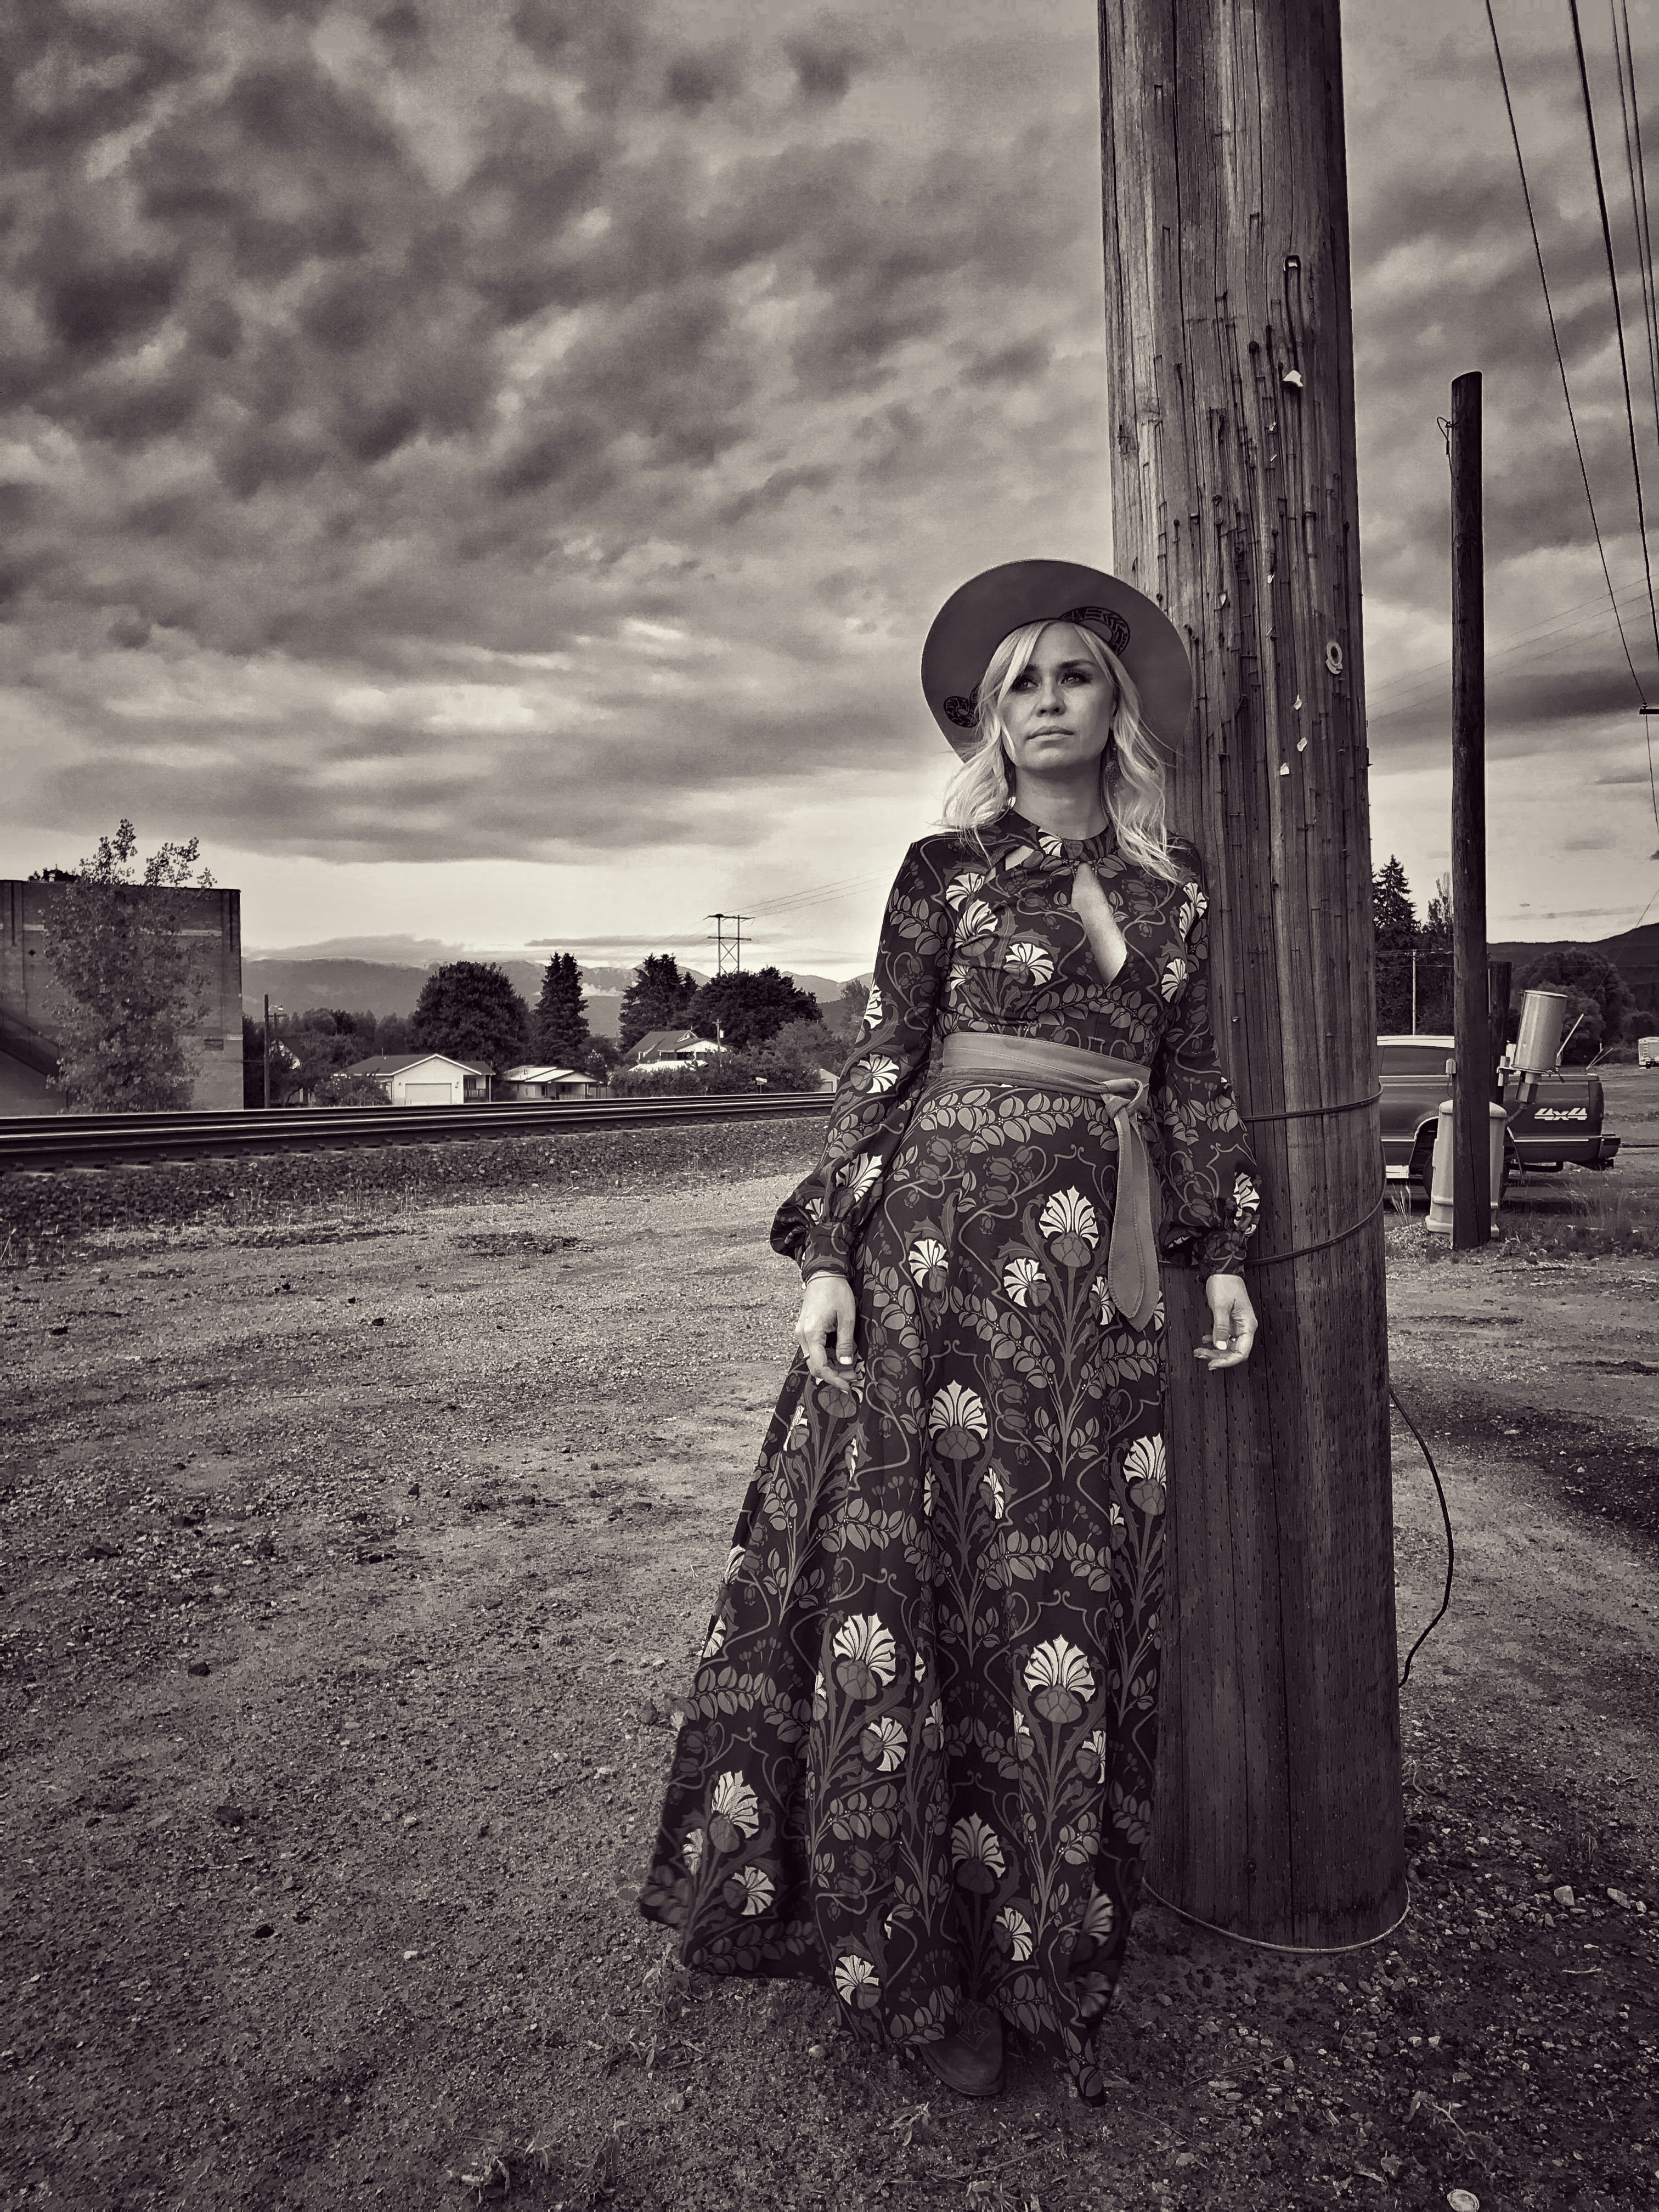 Black and white photograph of Sofia Talvik standing next to a telephone pole with a cloudy sky